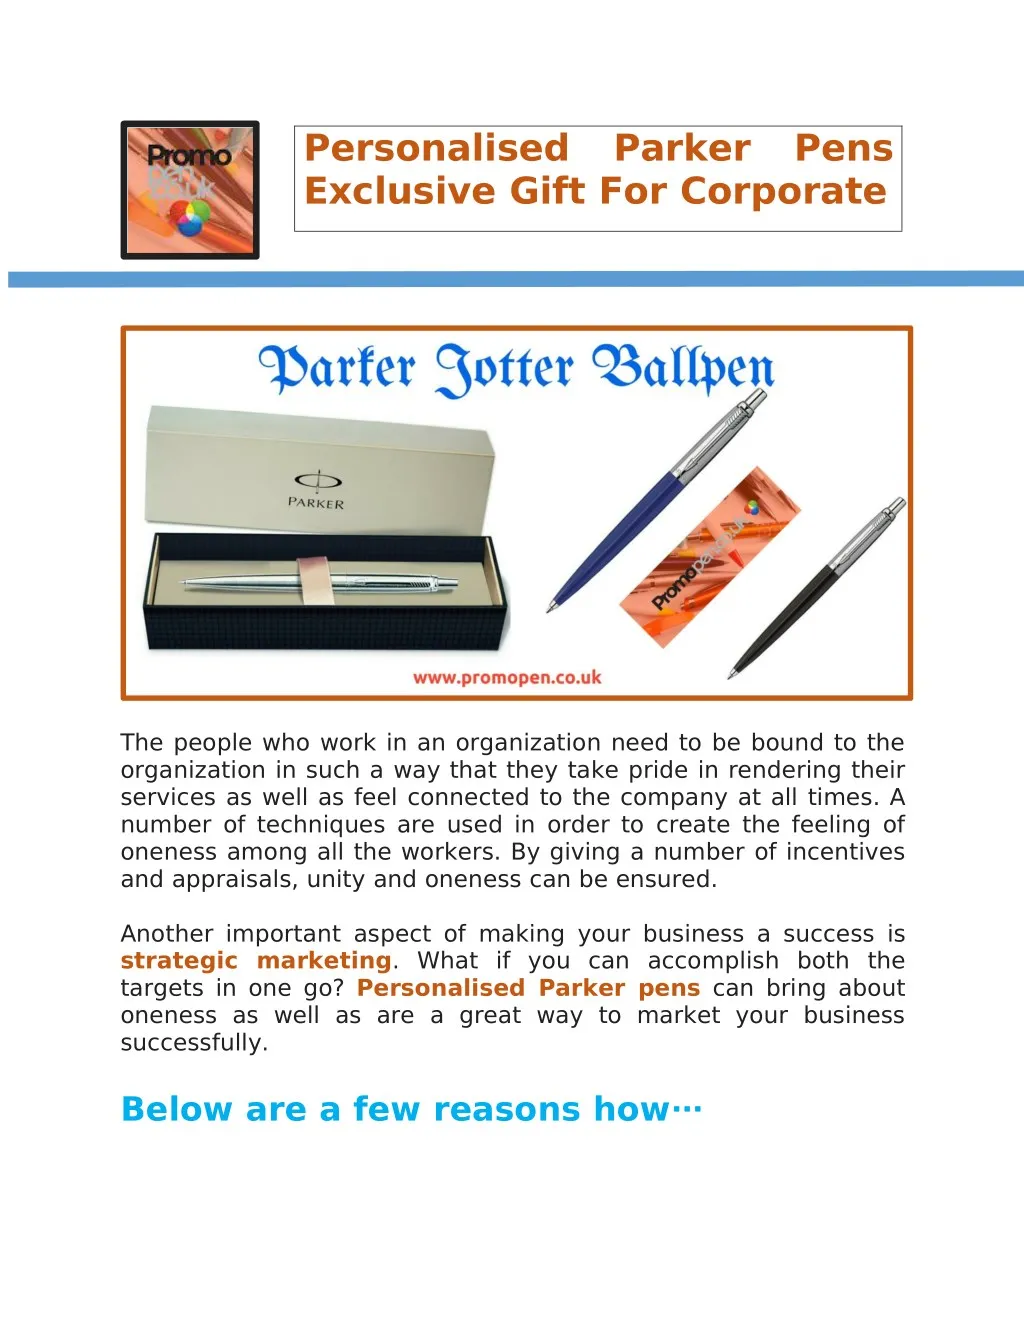 personalised exclusive gift for corporate